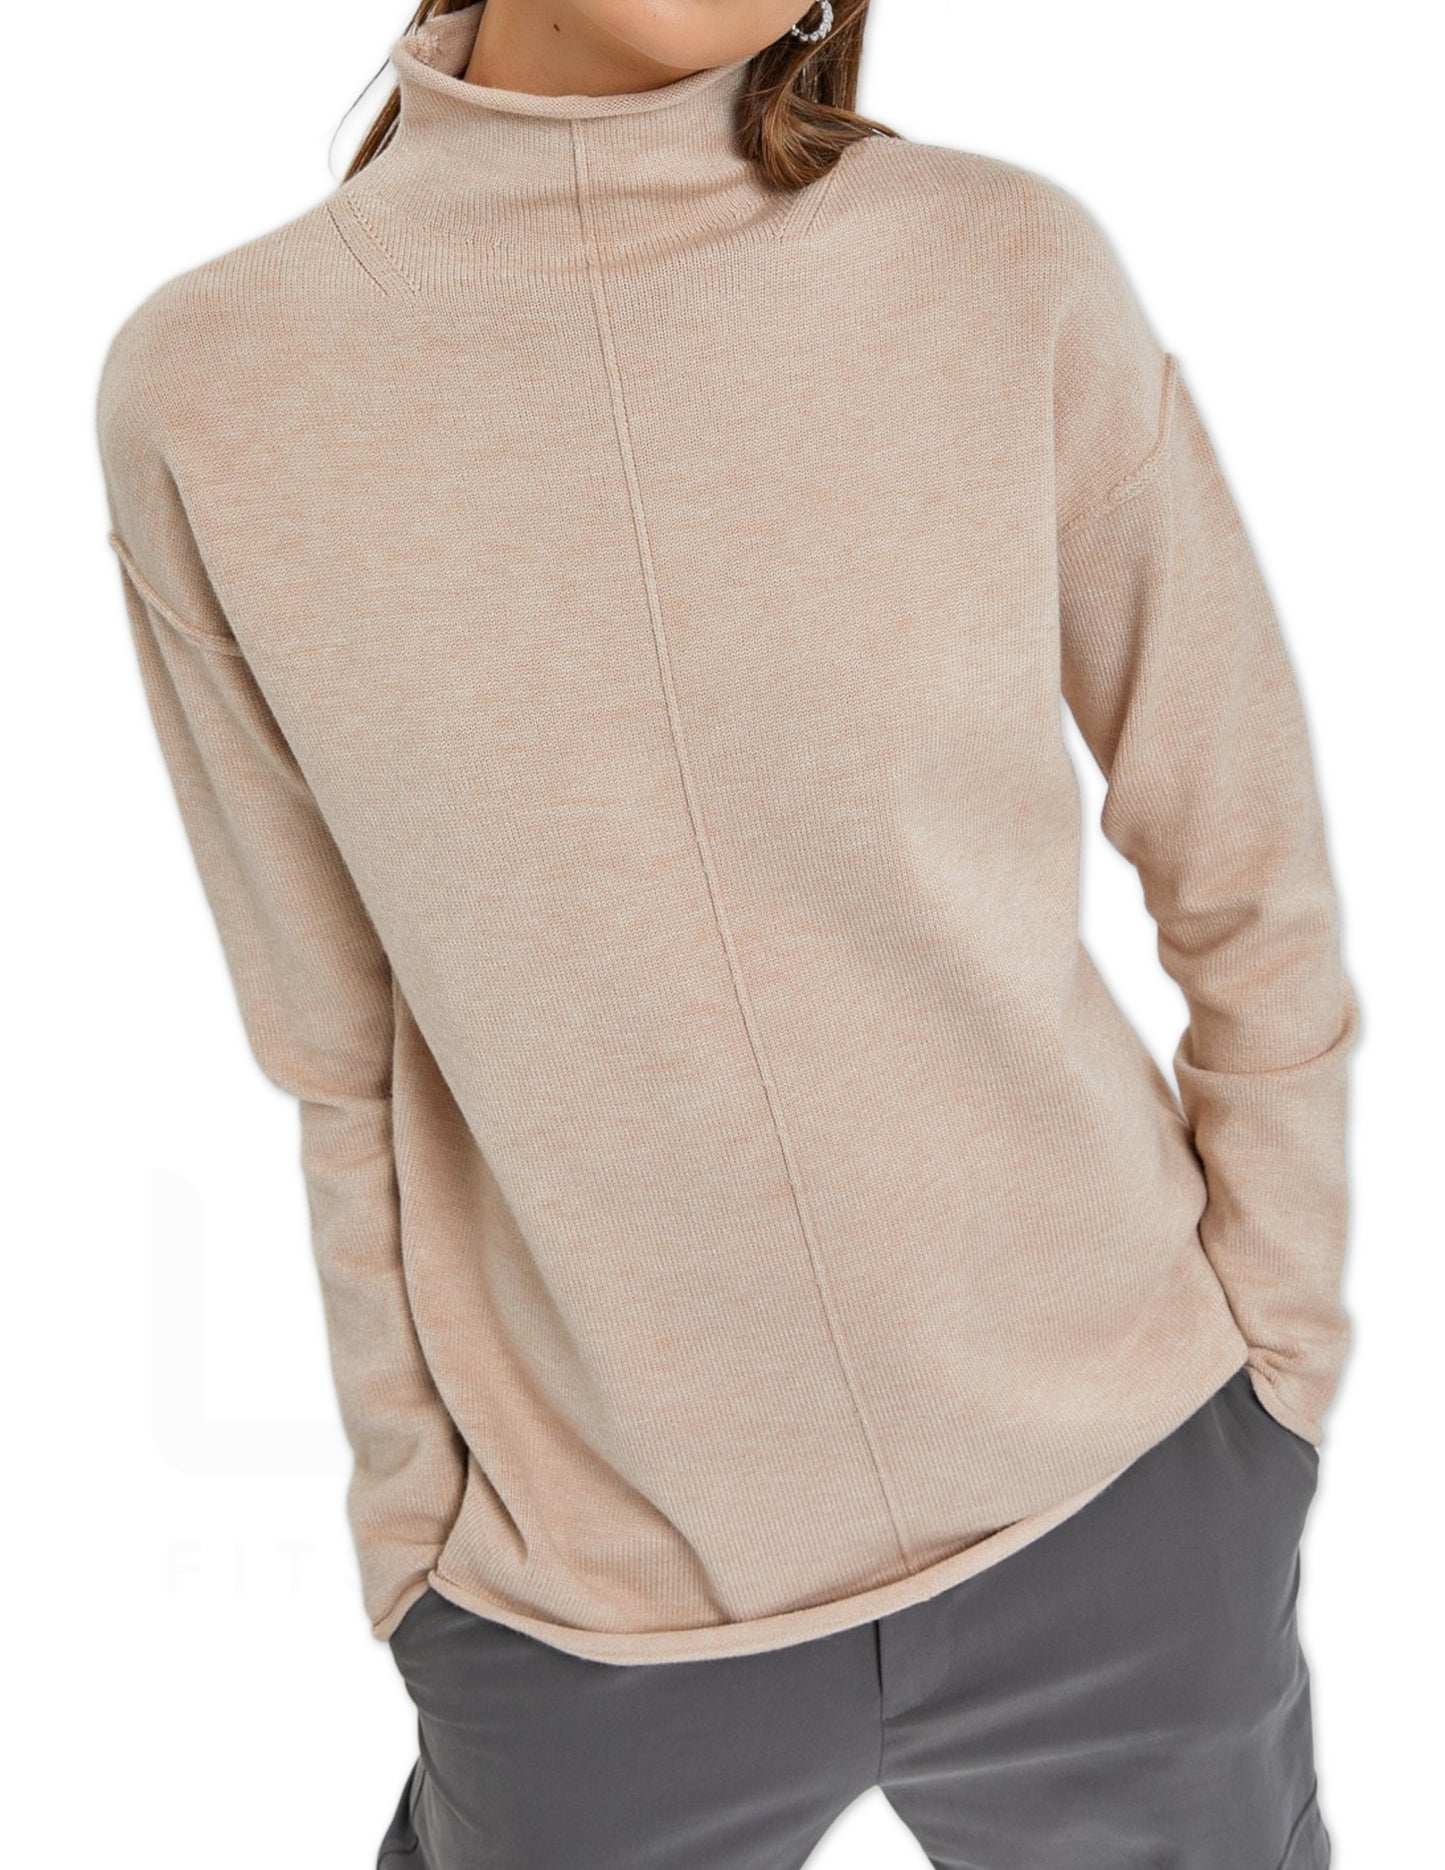 The Halle Sweater - Oatmeal